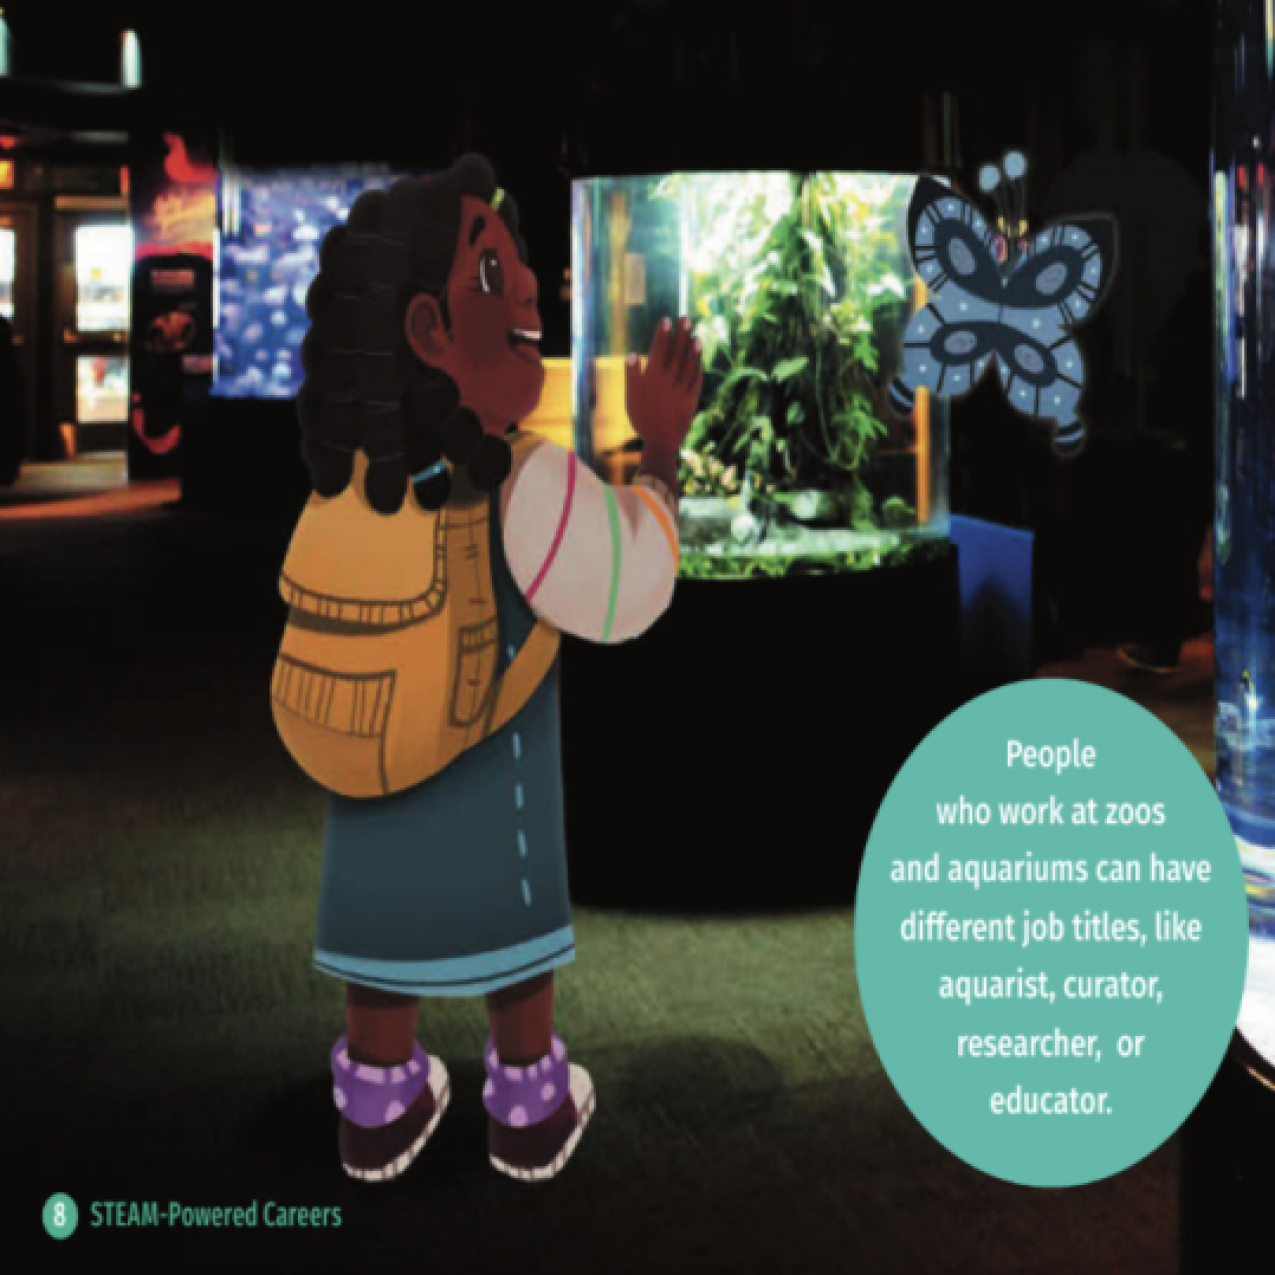 A two page excerpt from the book. An illustrated child is superimposed over a photo from a real aquarium as though she is looking at an exhibit. The text reads "People who work at zoos and aquariums can have different job titels, like aquarist, curator, research, or educator."